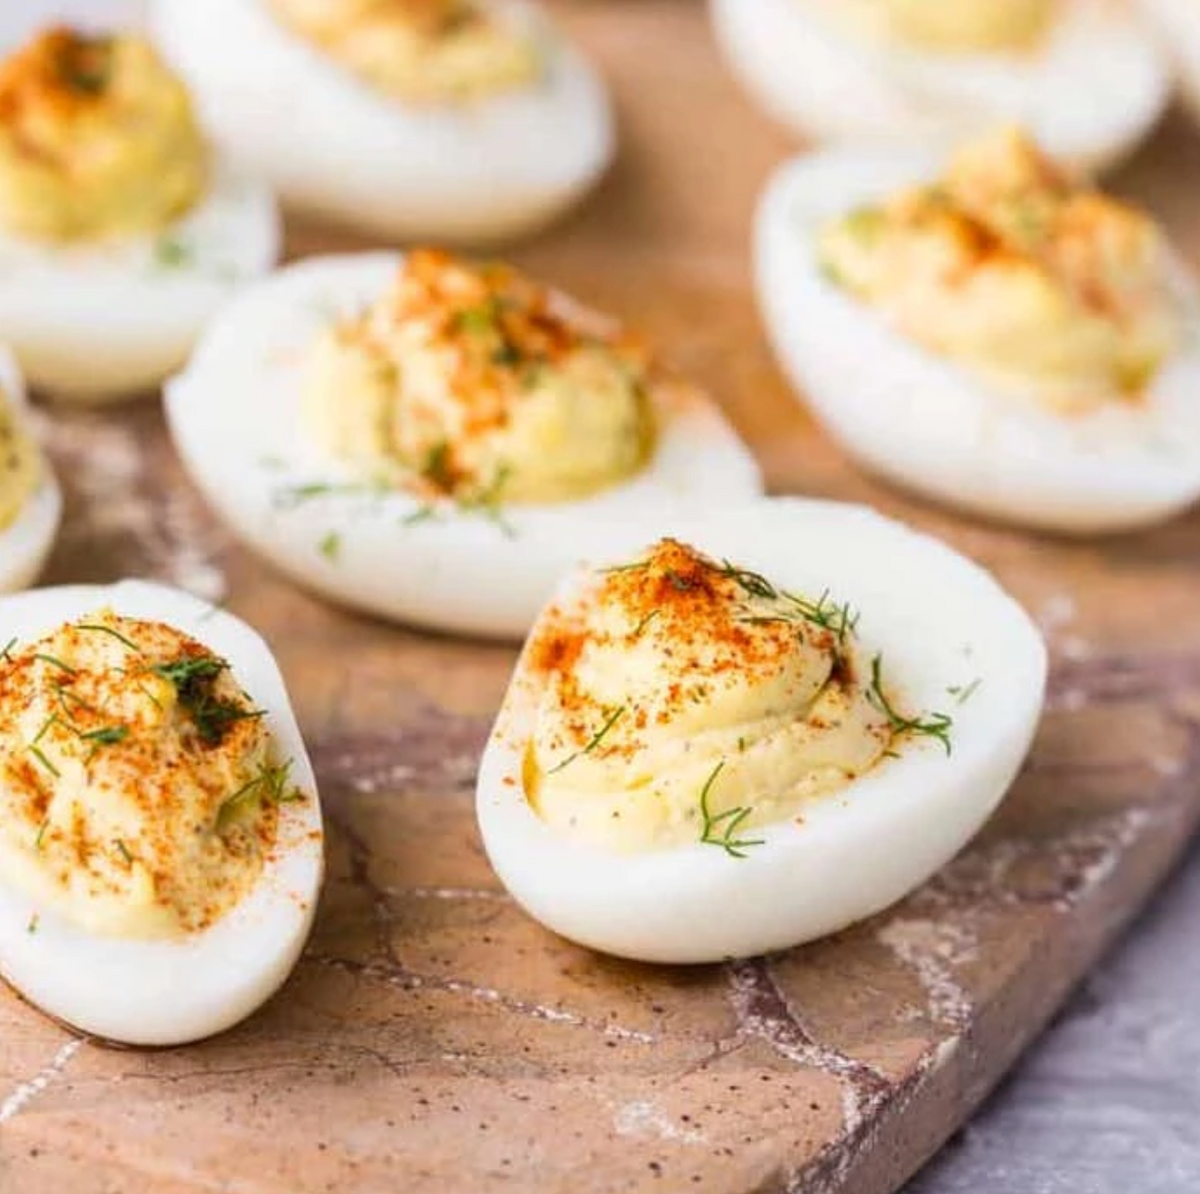 How To Make Truffled Deviled Eggs | We Drink Bubbles